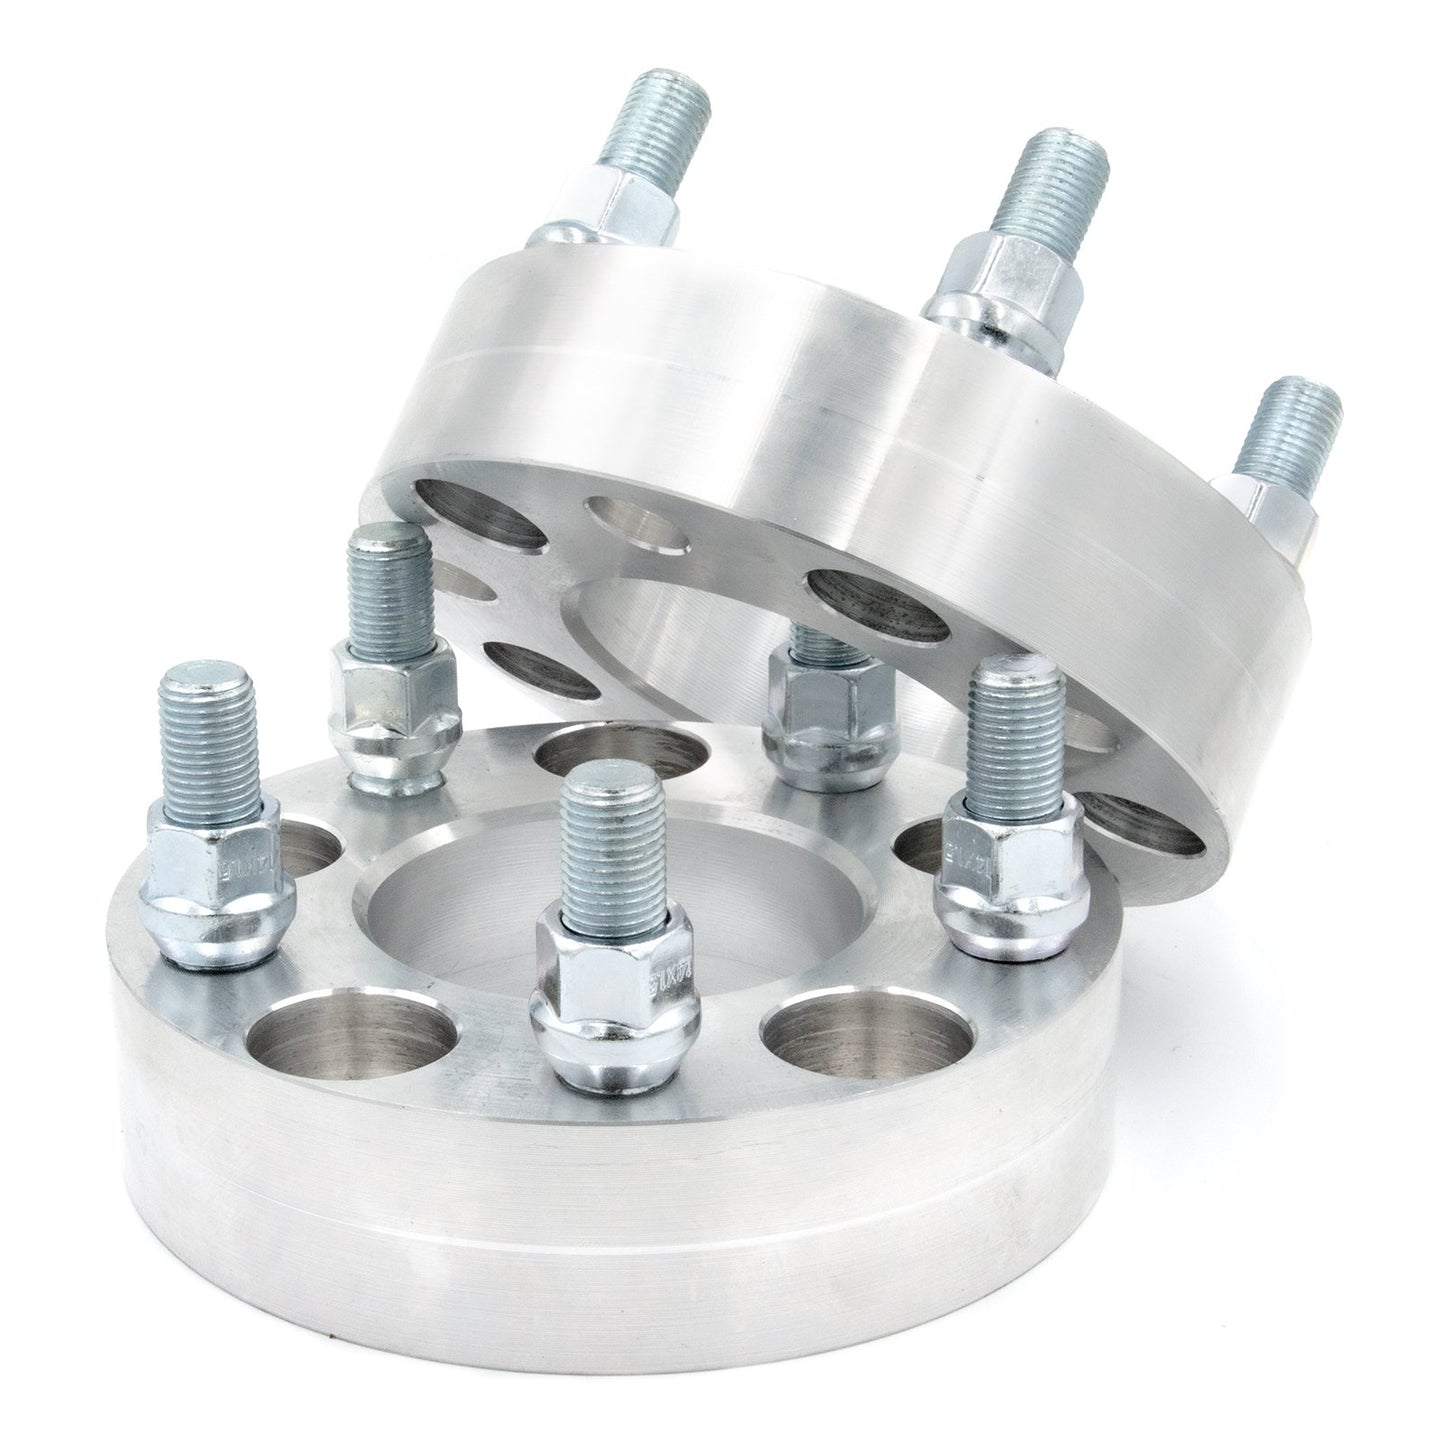 5x5" to 5x135 Wheel Spacer/Adapter - Thickness: 3/4"- 4"